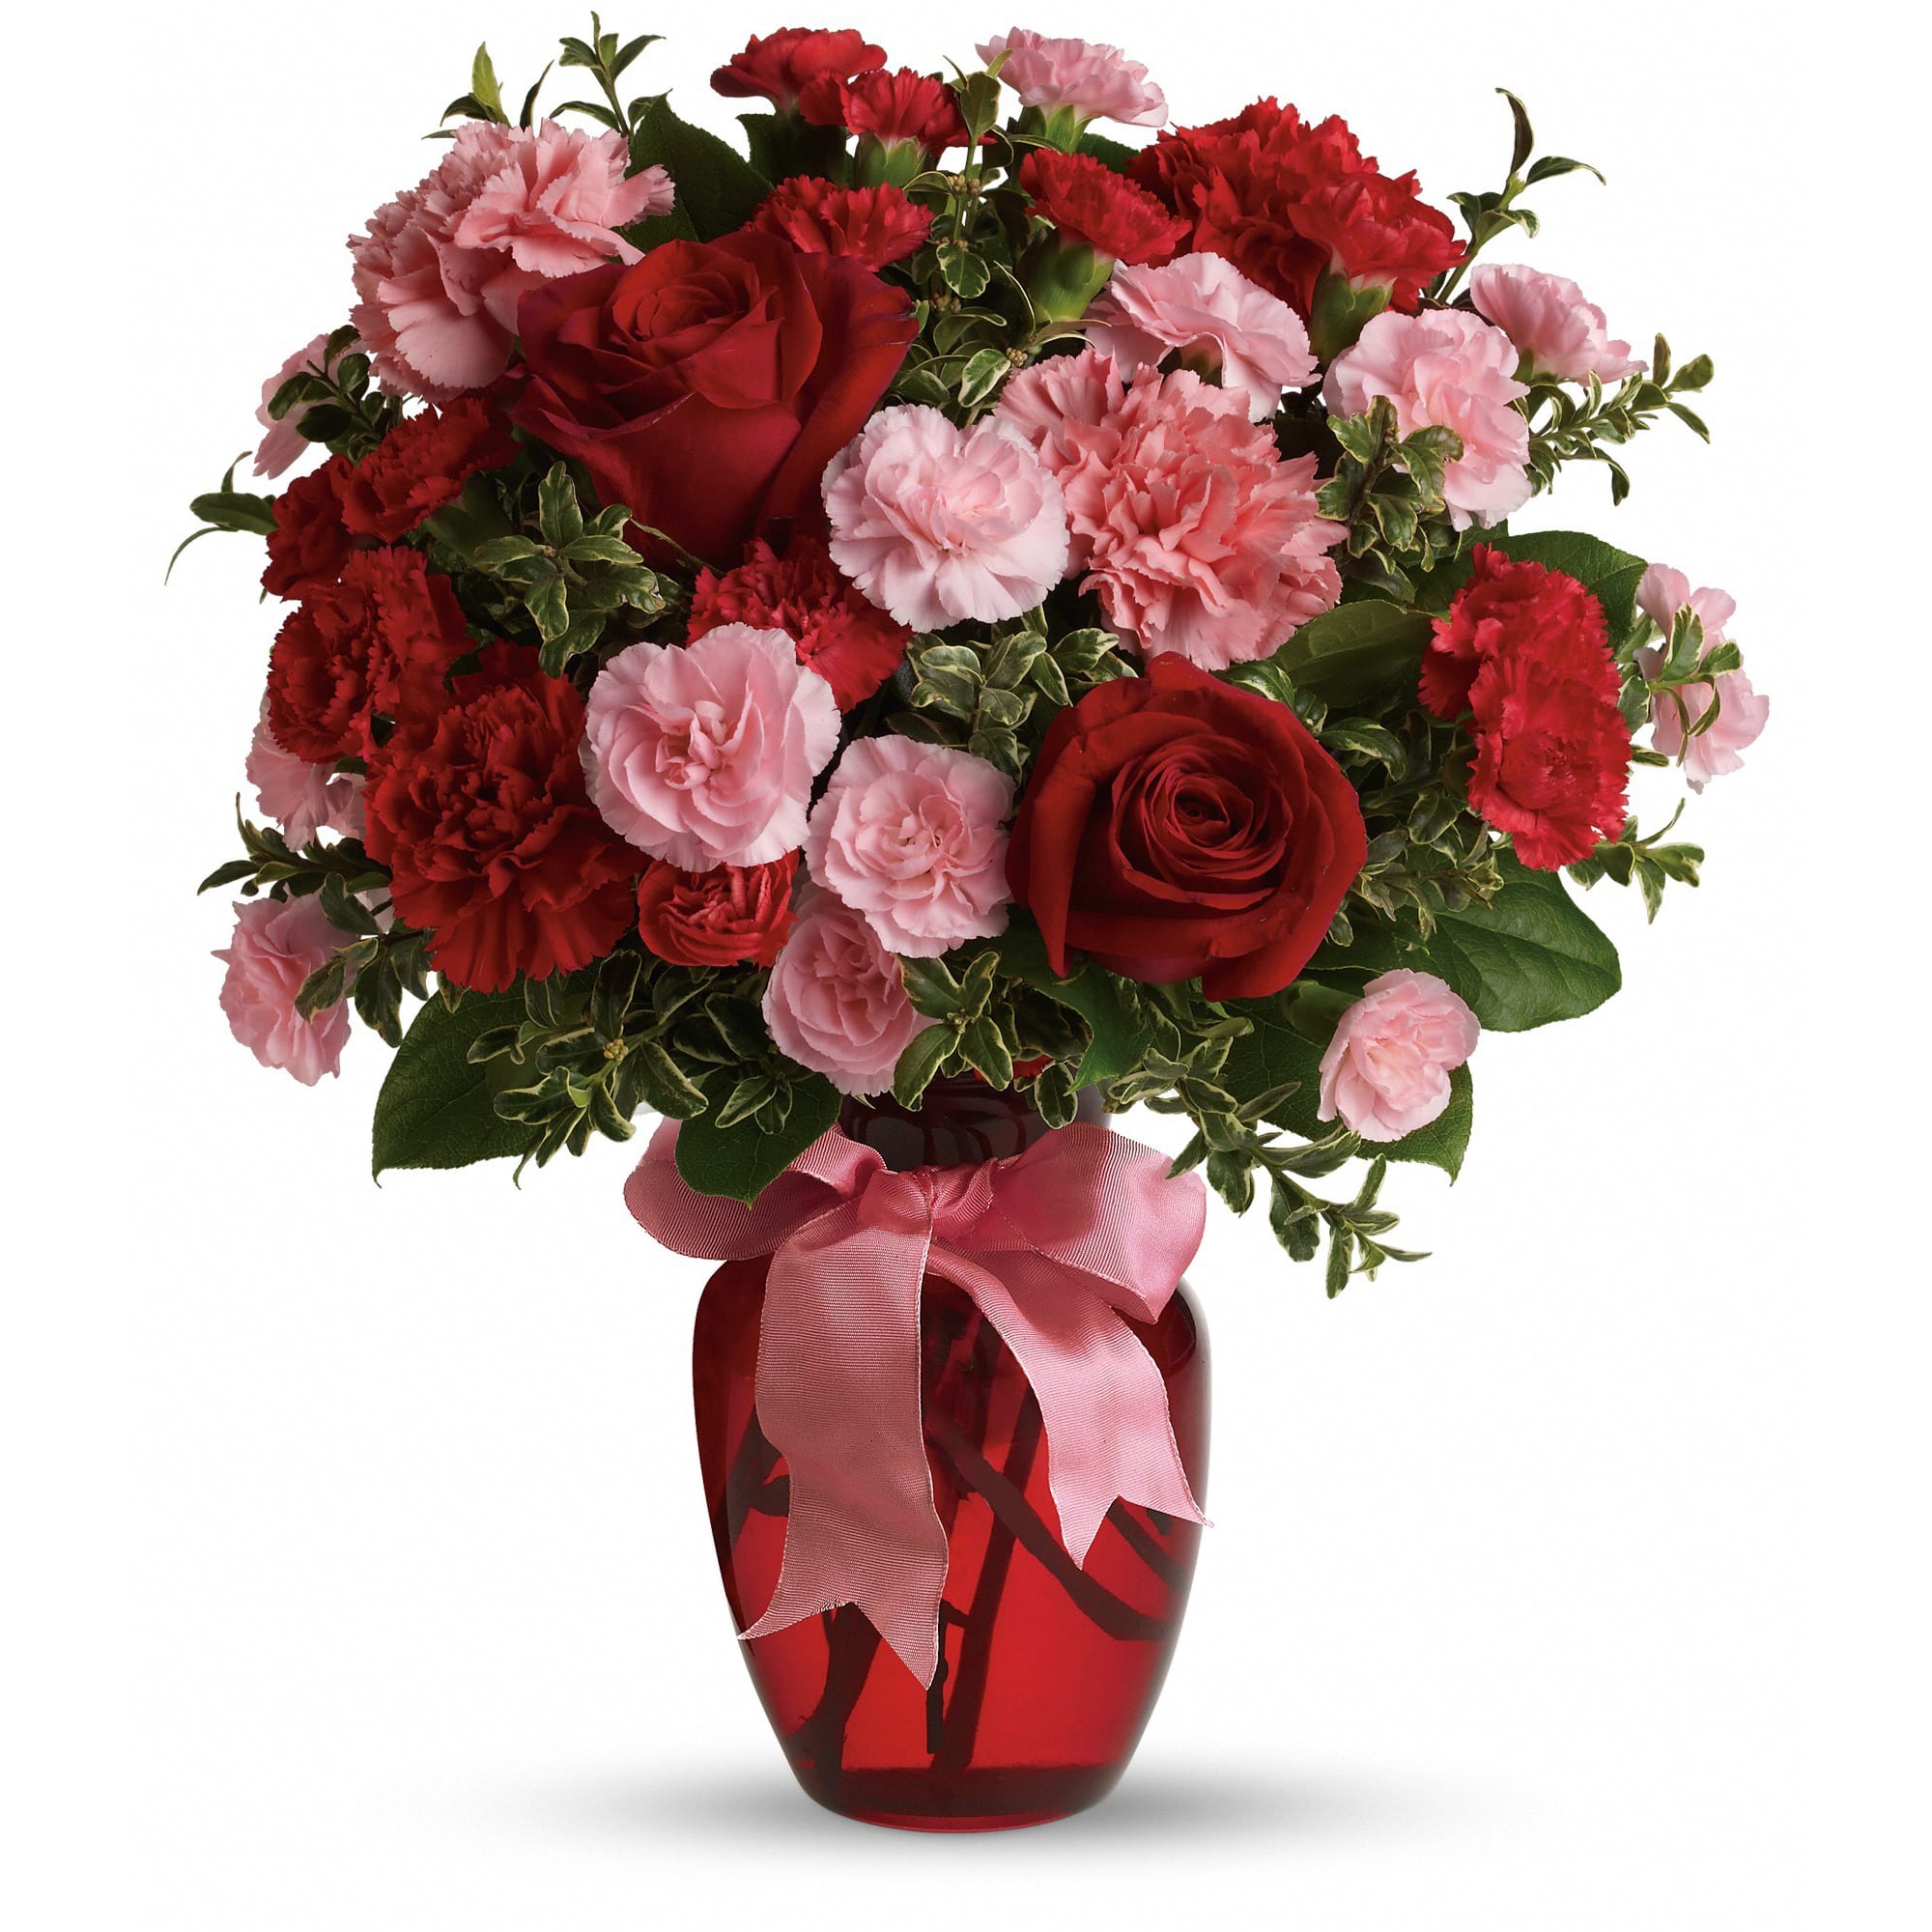 Dance with Me Bouquet by Teleflora - Turn up the heat on your relationship with this sizzling bouquet of carnations and roses in a sparkling glass vase. It makes a spectacular gift for anniversary or any loving occasion.  